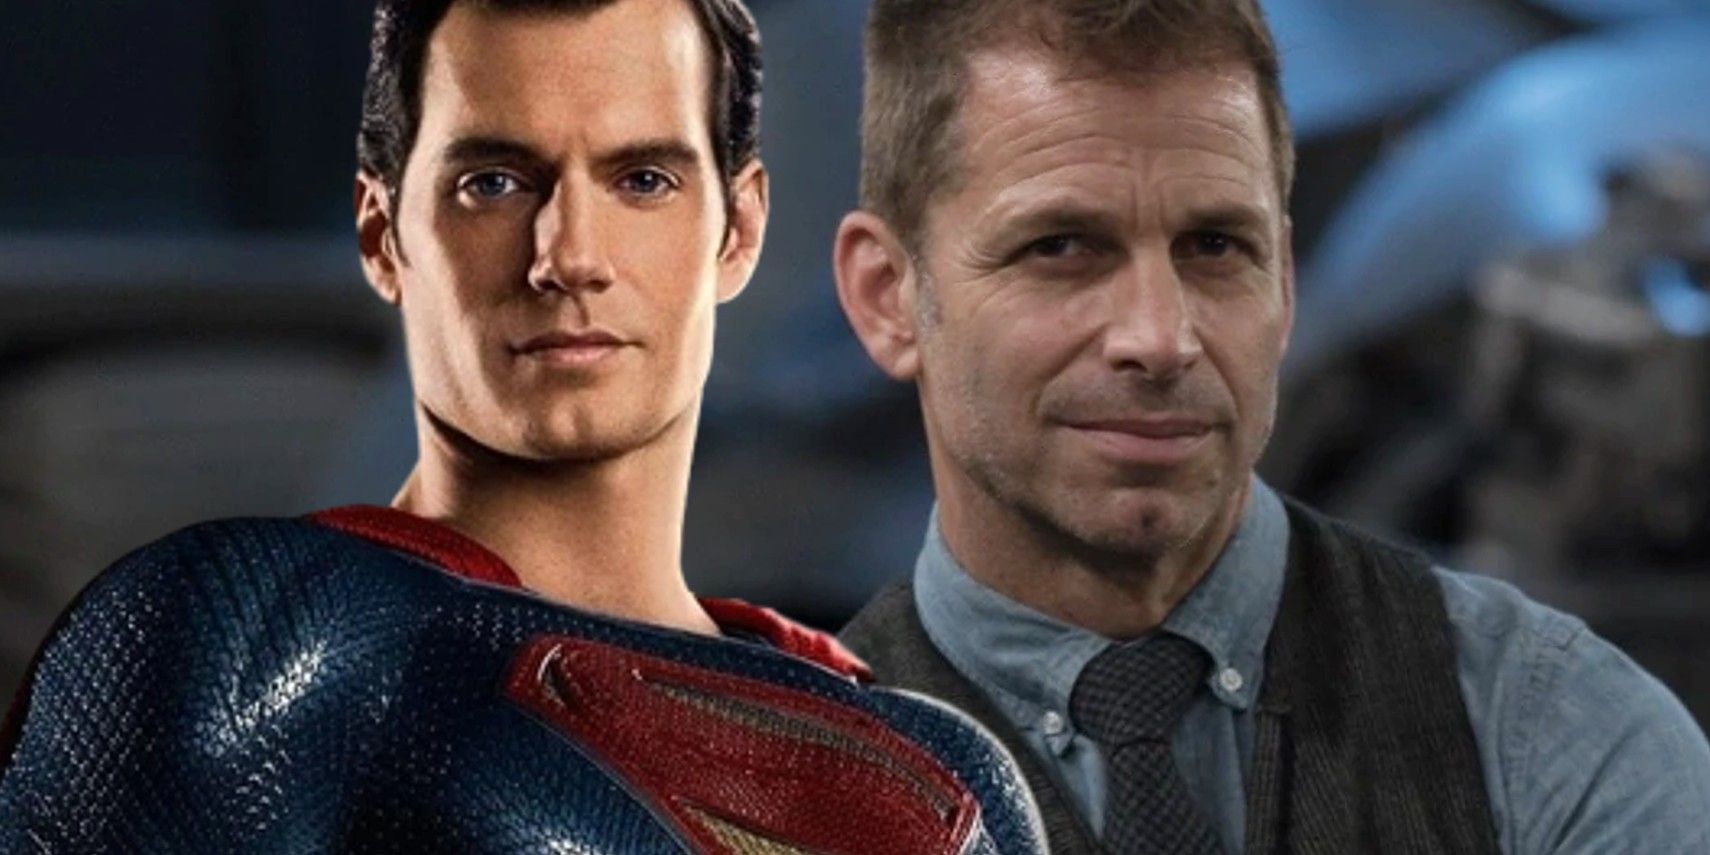 Combined image of Superman and Zack Snyder